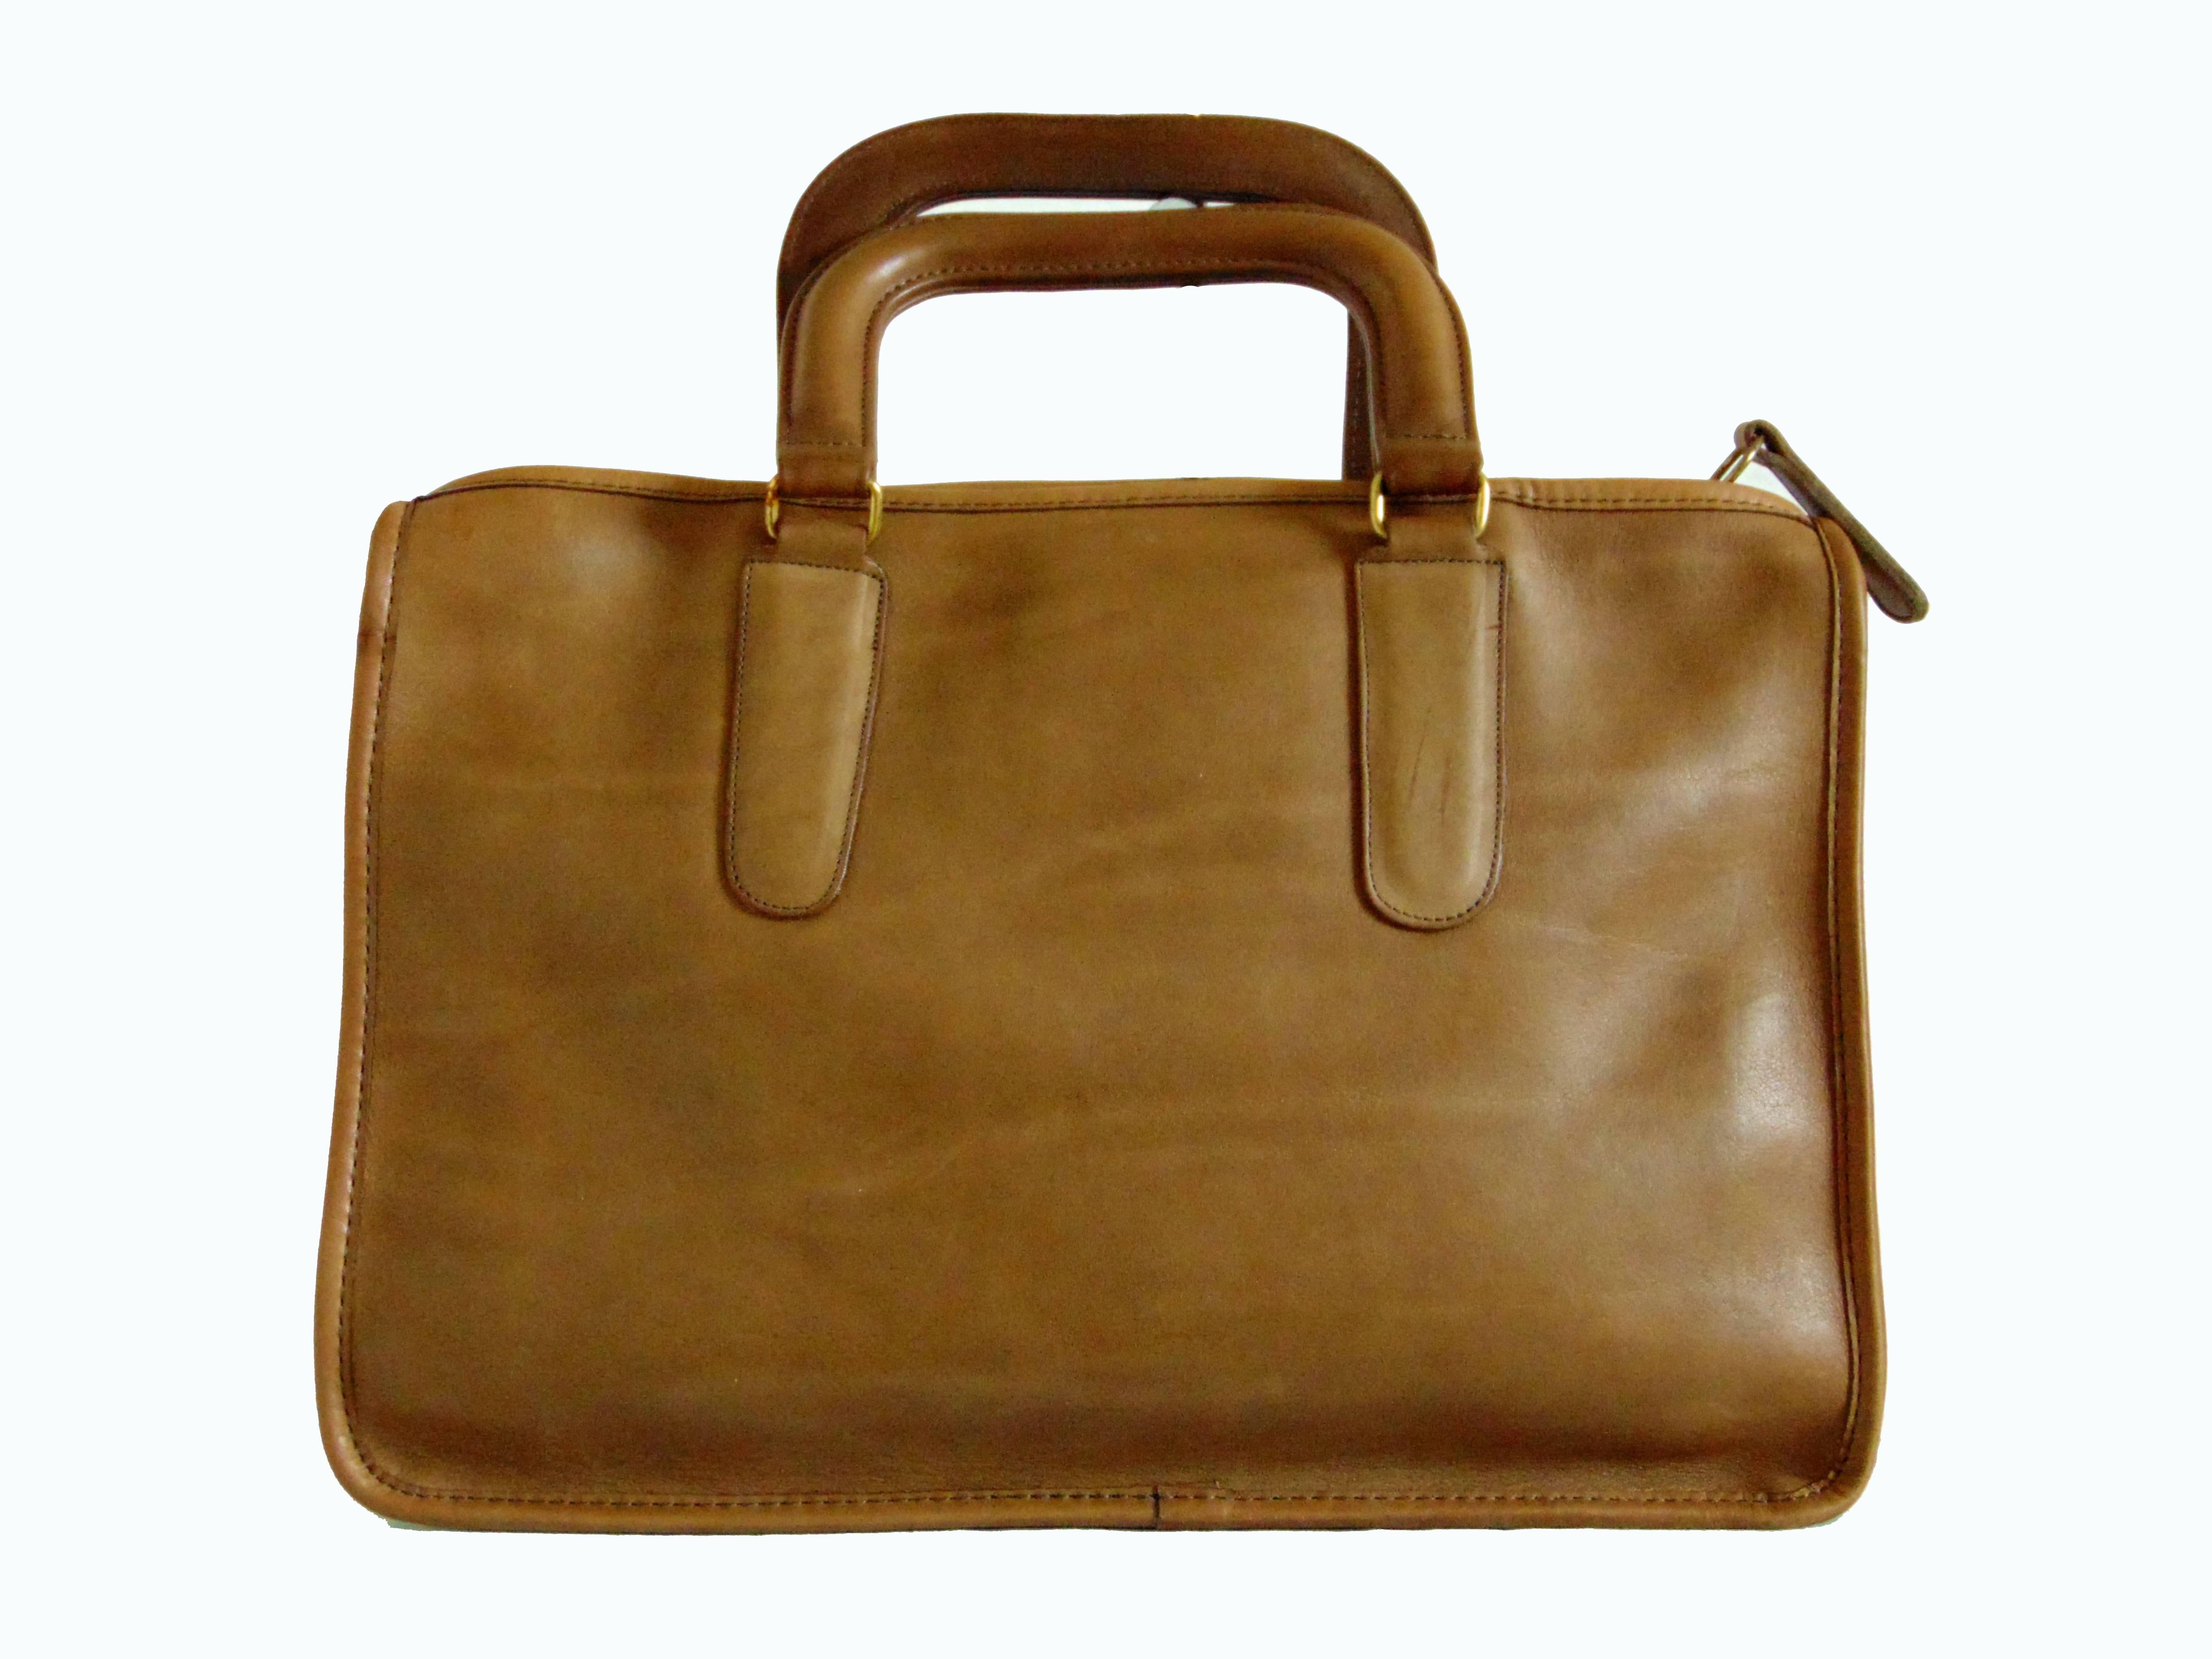 Here's a classic tote bag designed by Bonnie Cashin for Coach Leatherware.  Made from saddle tan leather, the interior is unlined and features one large zip pocket.  Fastens with a chunky brass zipper.  In excellent condition for its age, this piece